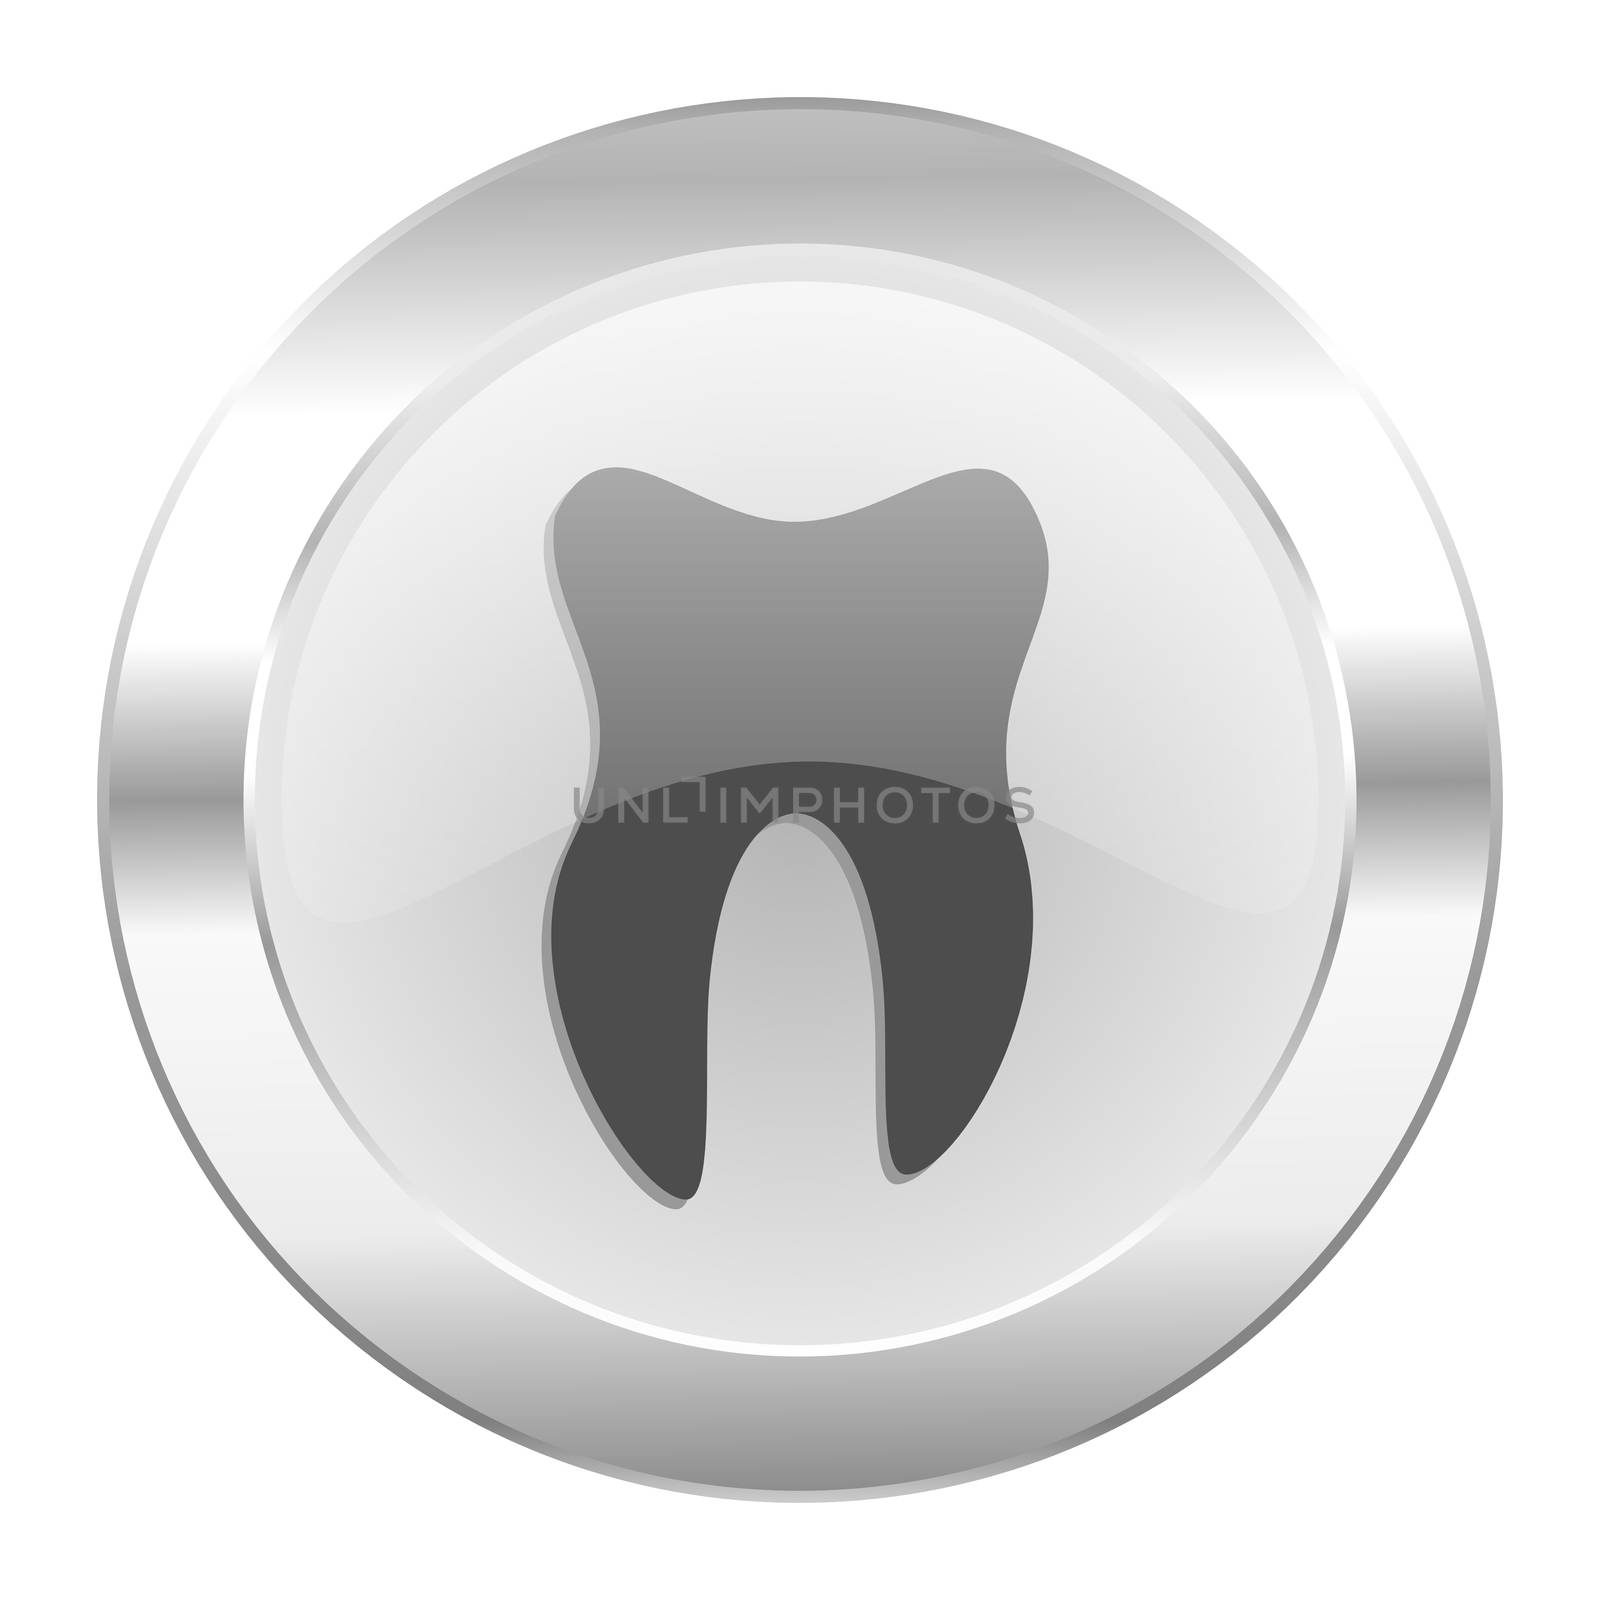 tooth chrome web icon isolated by alexwhite